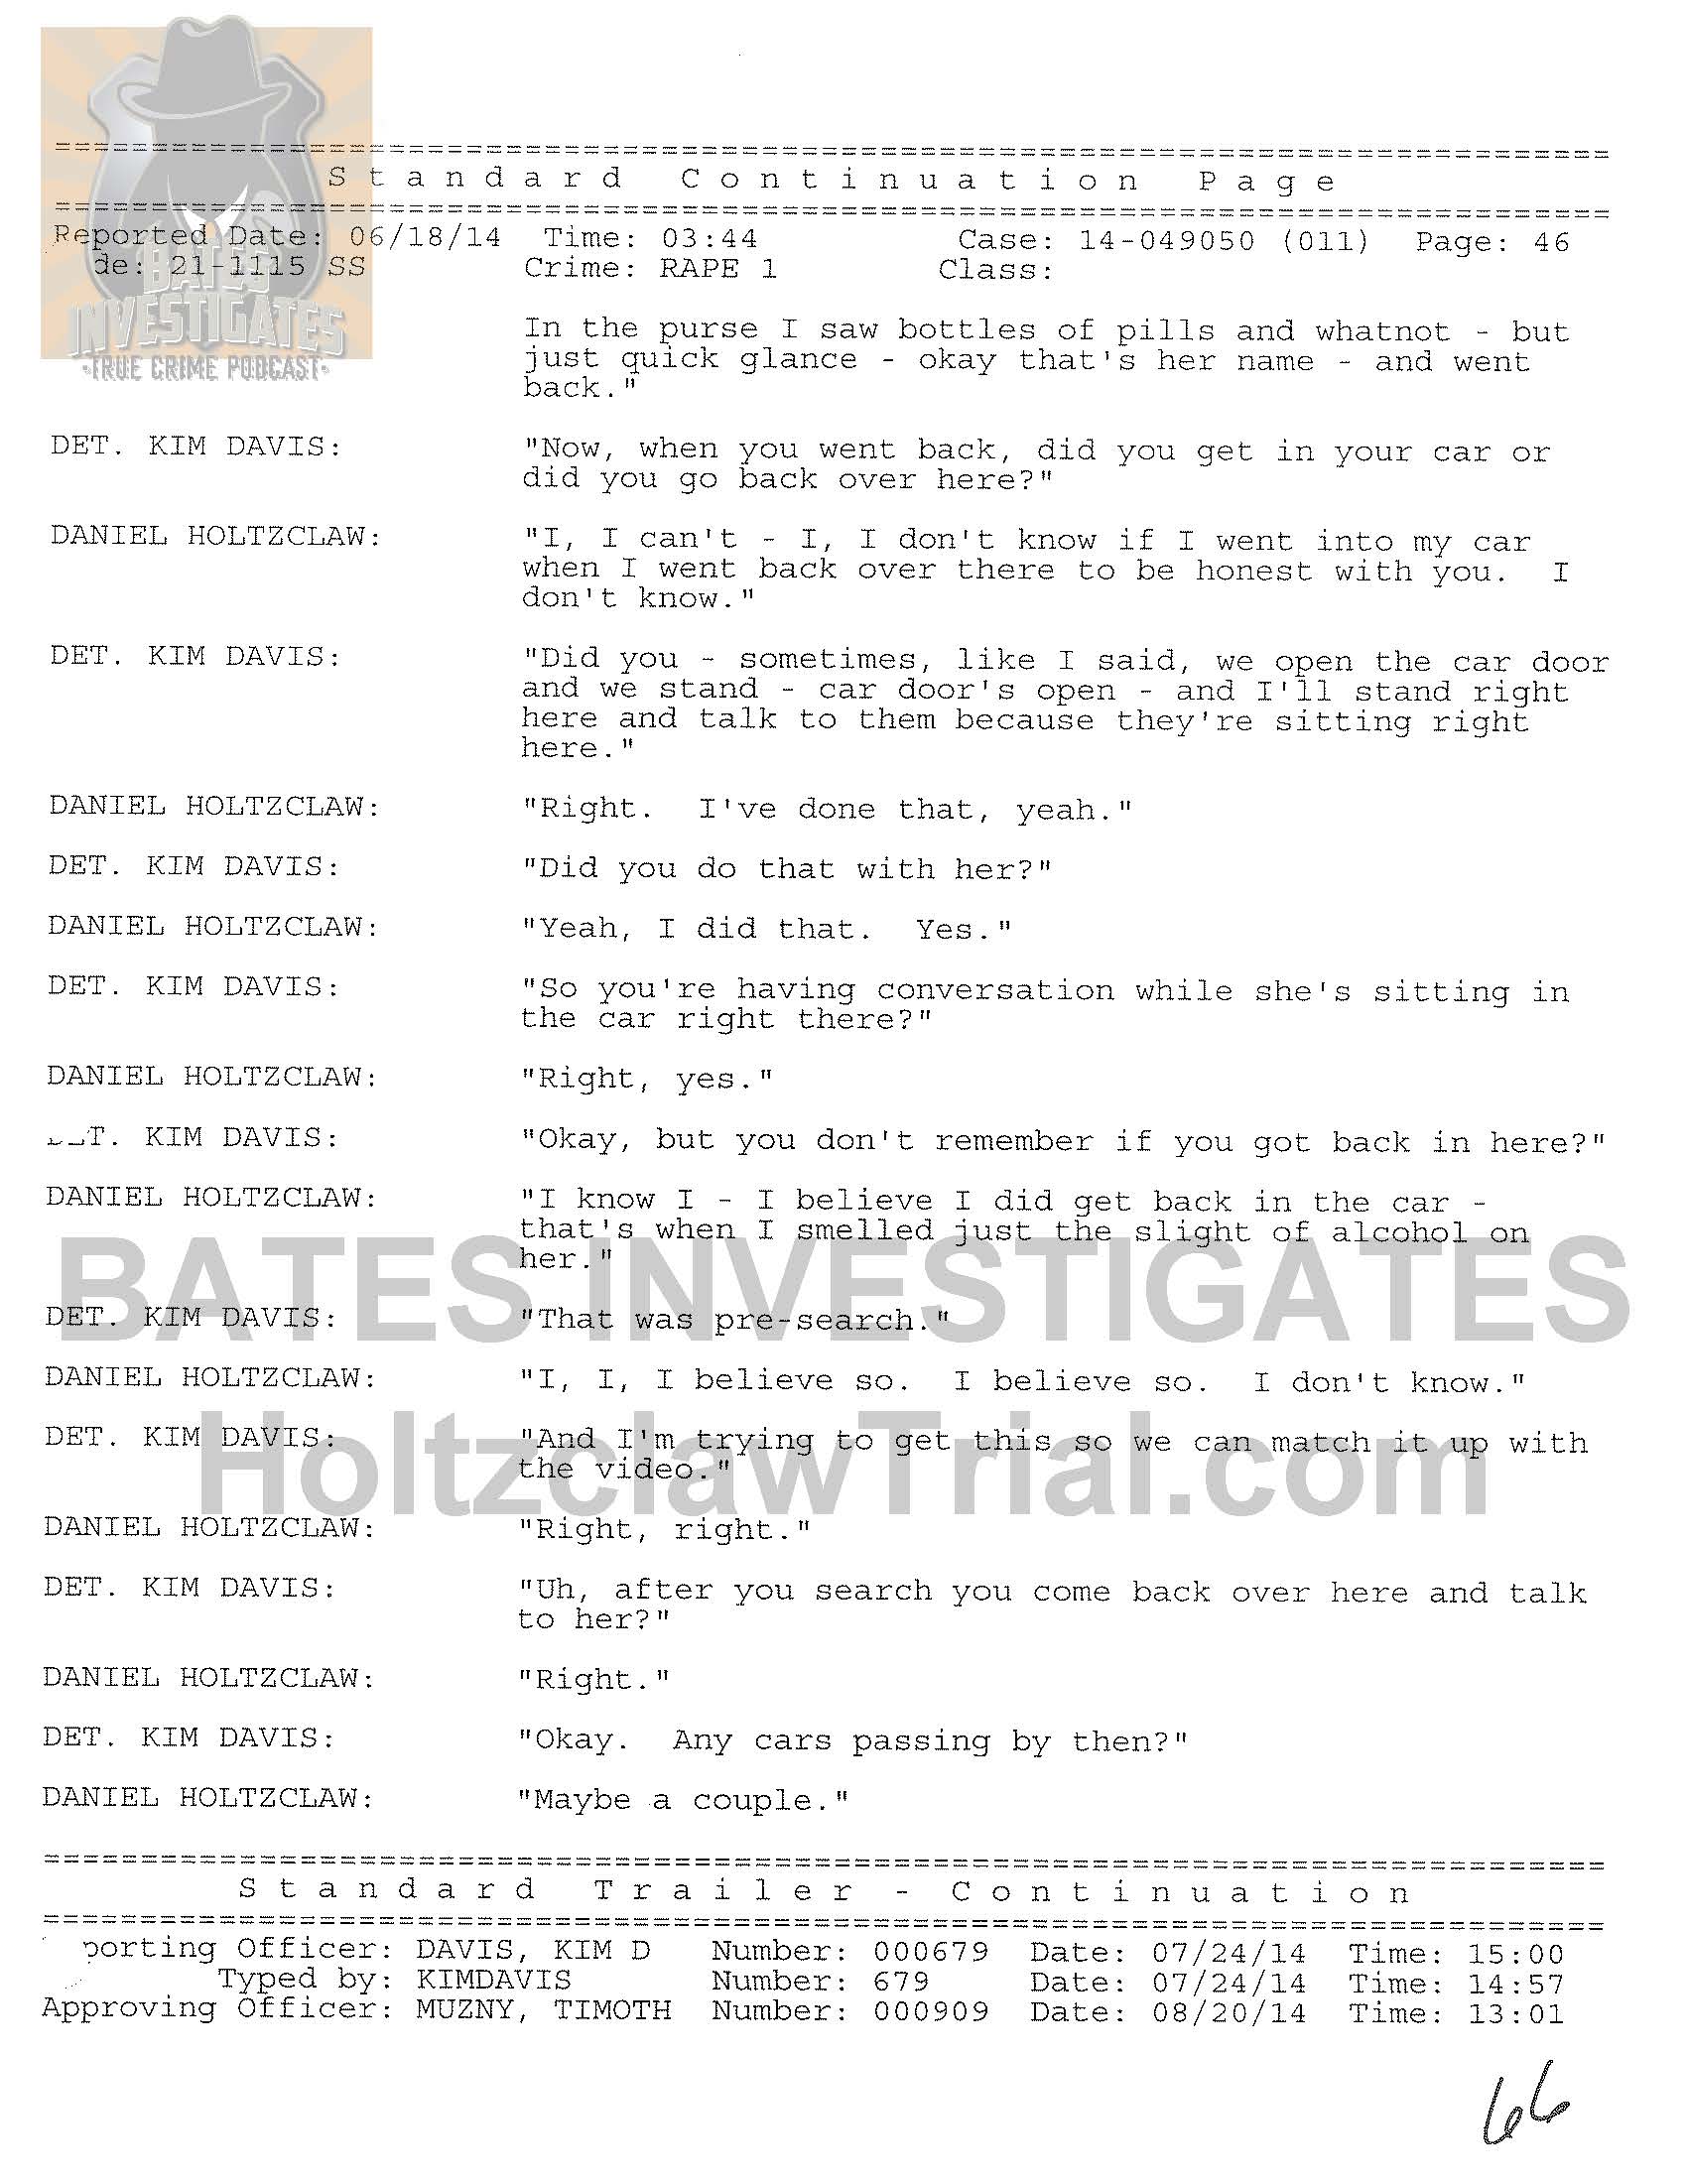 Holtzclaw Interrogation Transcript - Ep02 Redacted_Page_46.jpg